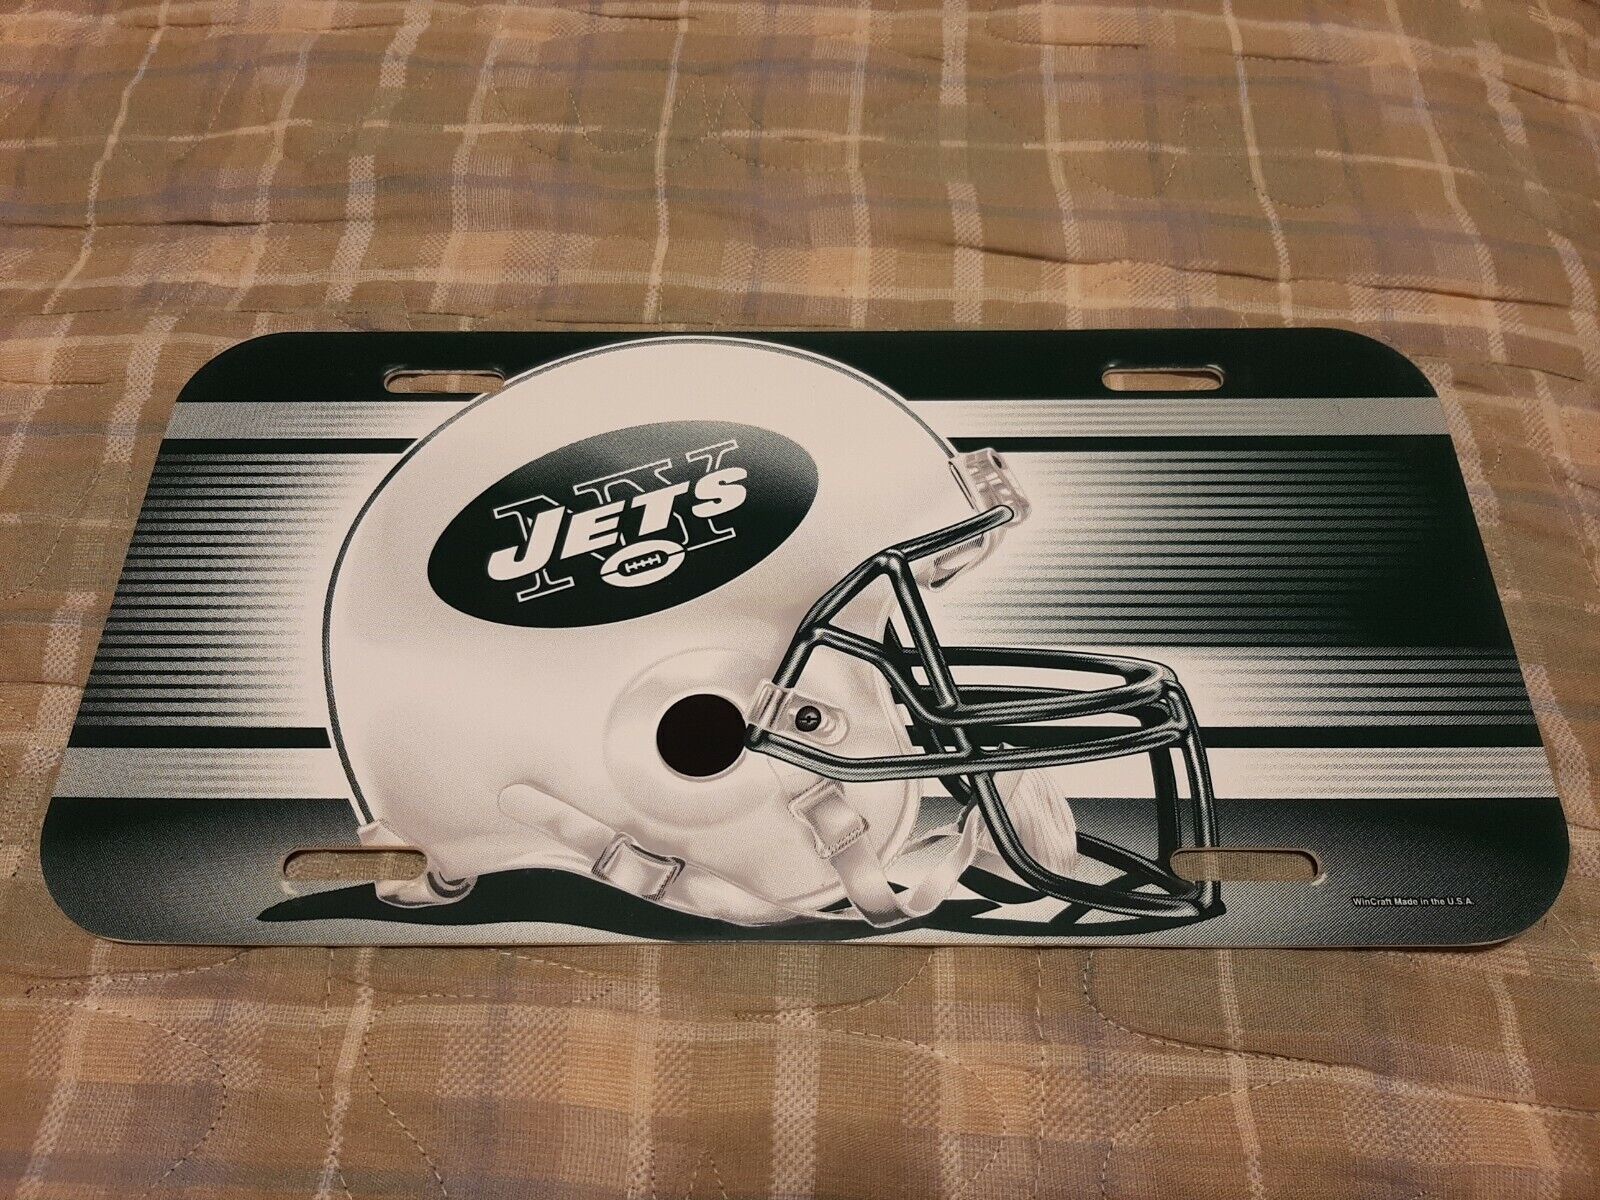 NEW YORK JETS VINTAGE PLASTIC AUTO TAG LICENSE PLATE (NOT PERFECT) 